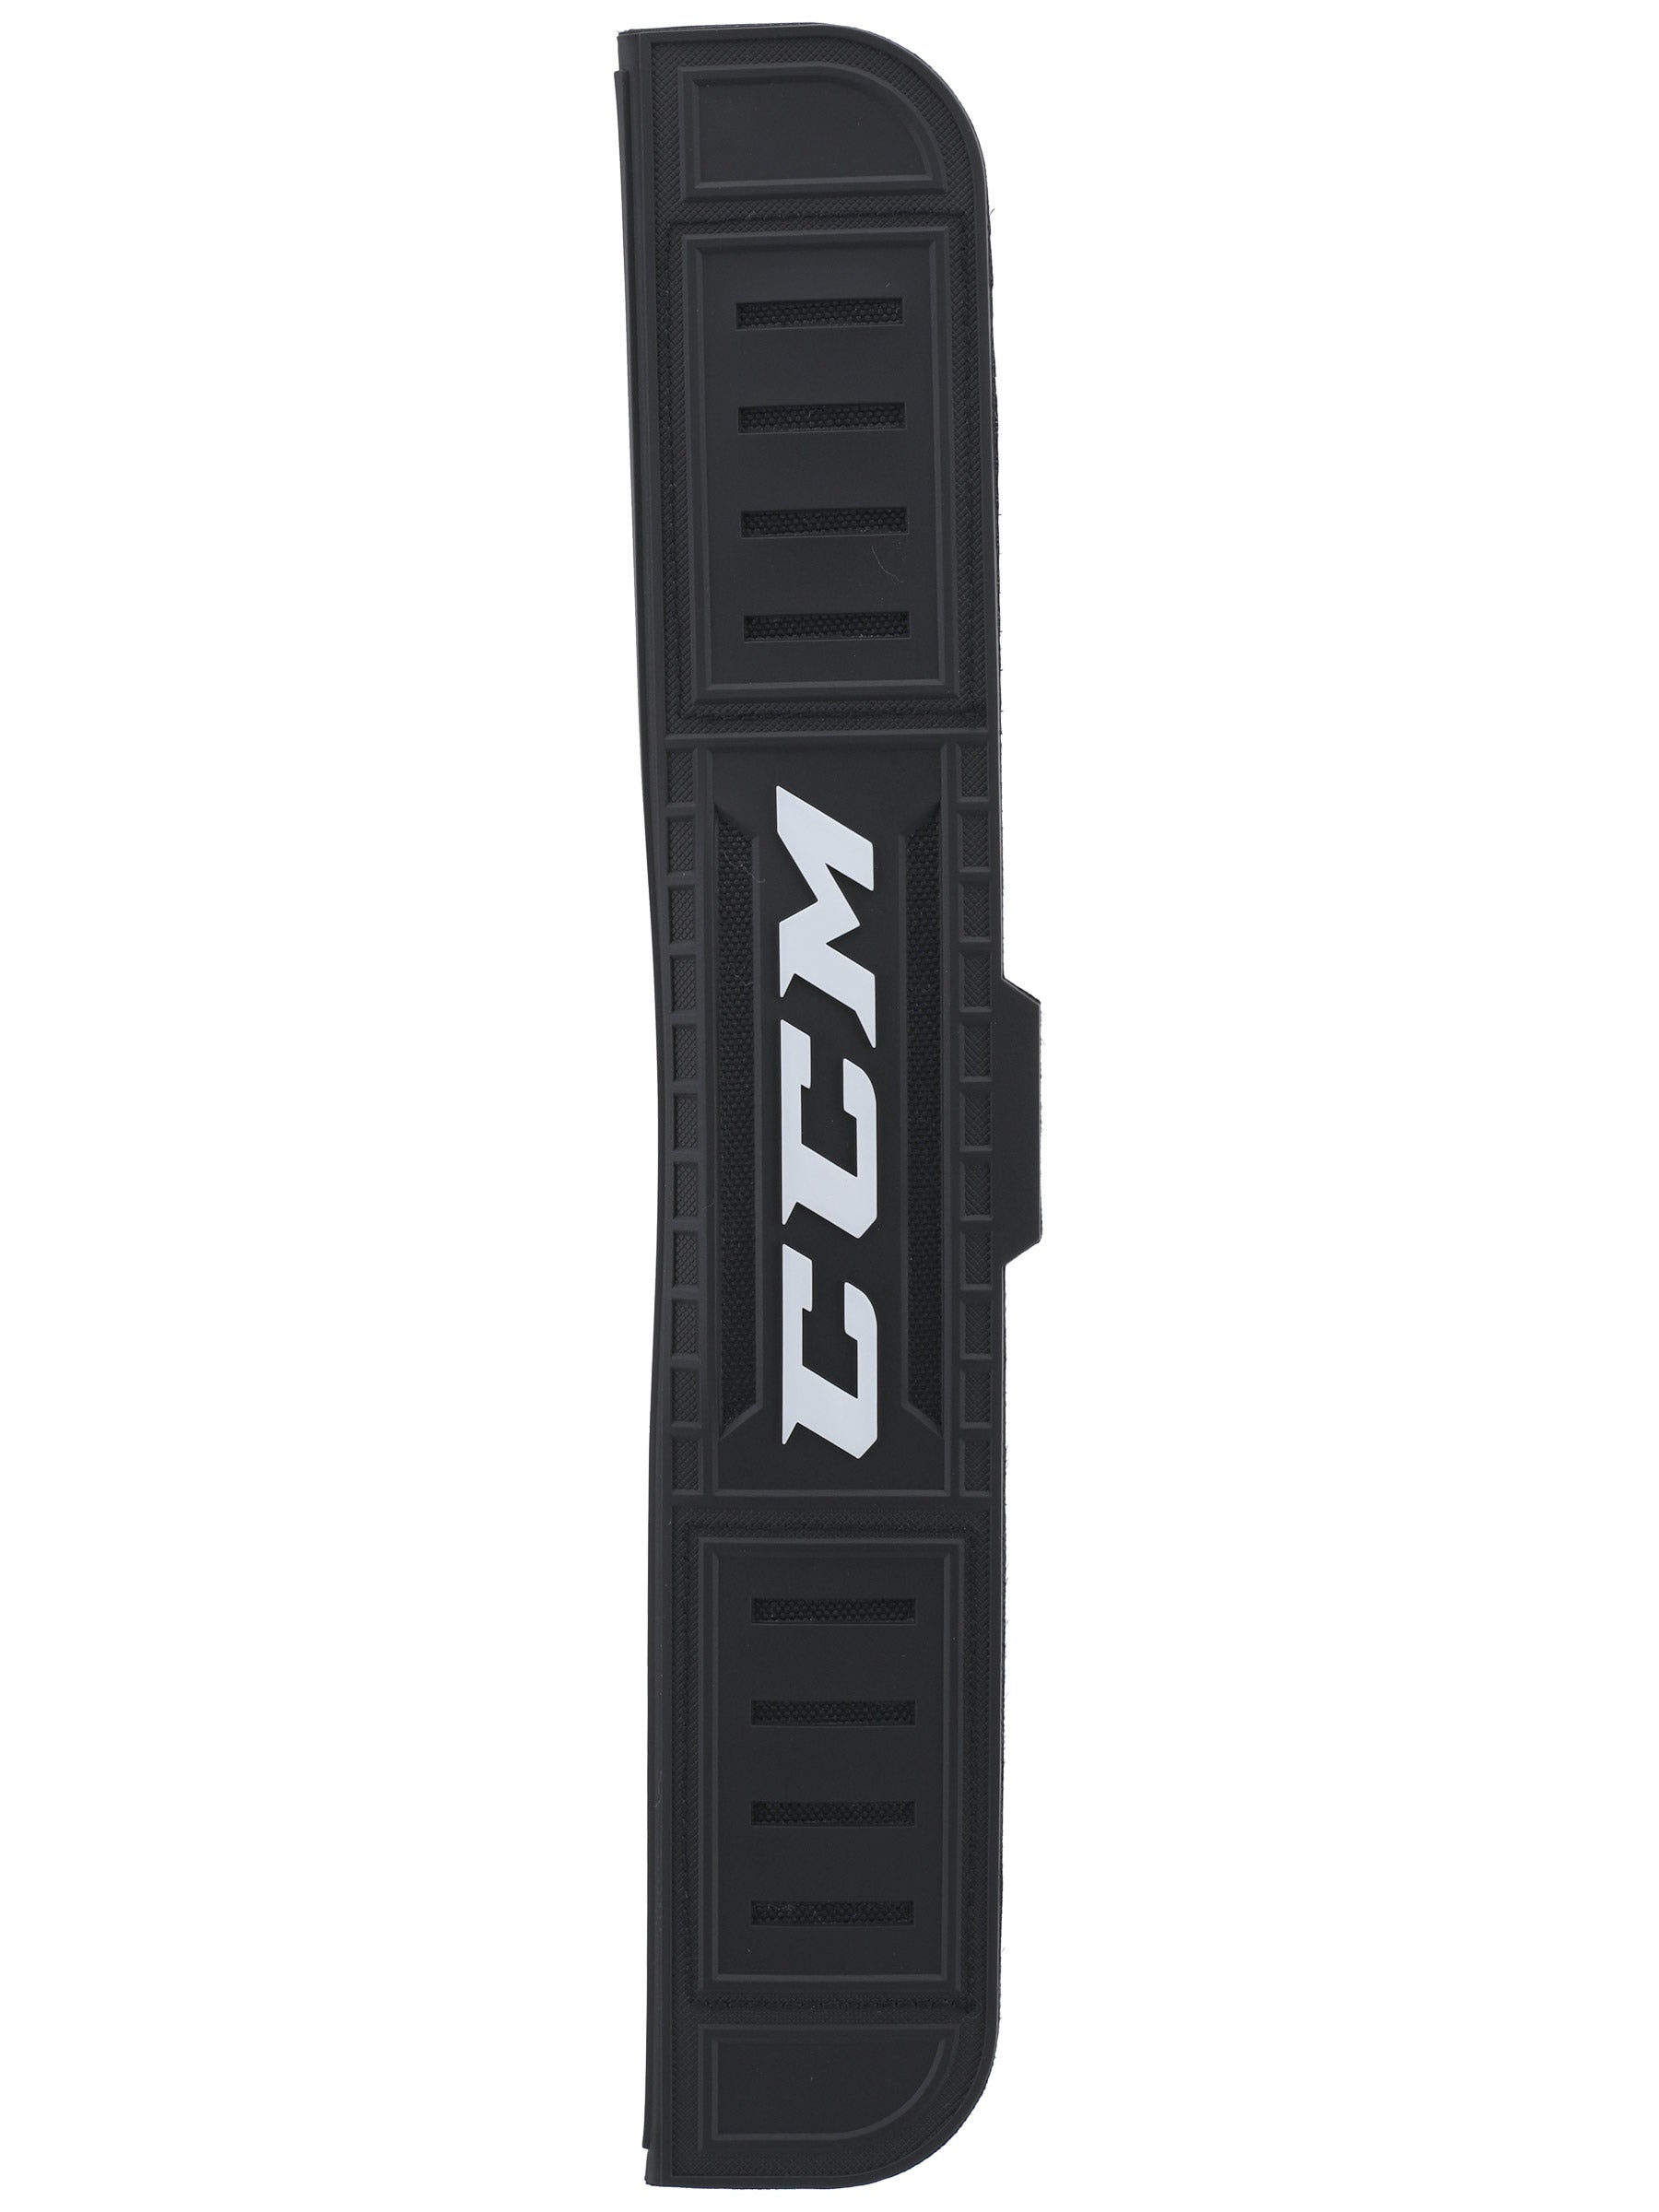 ccm-blade-carrying-case